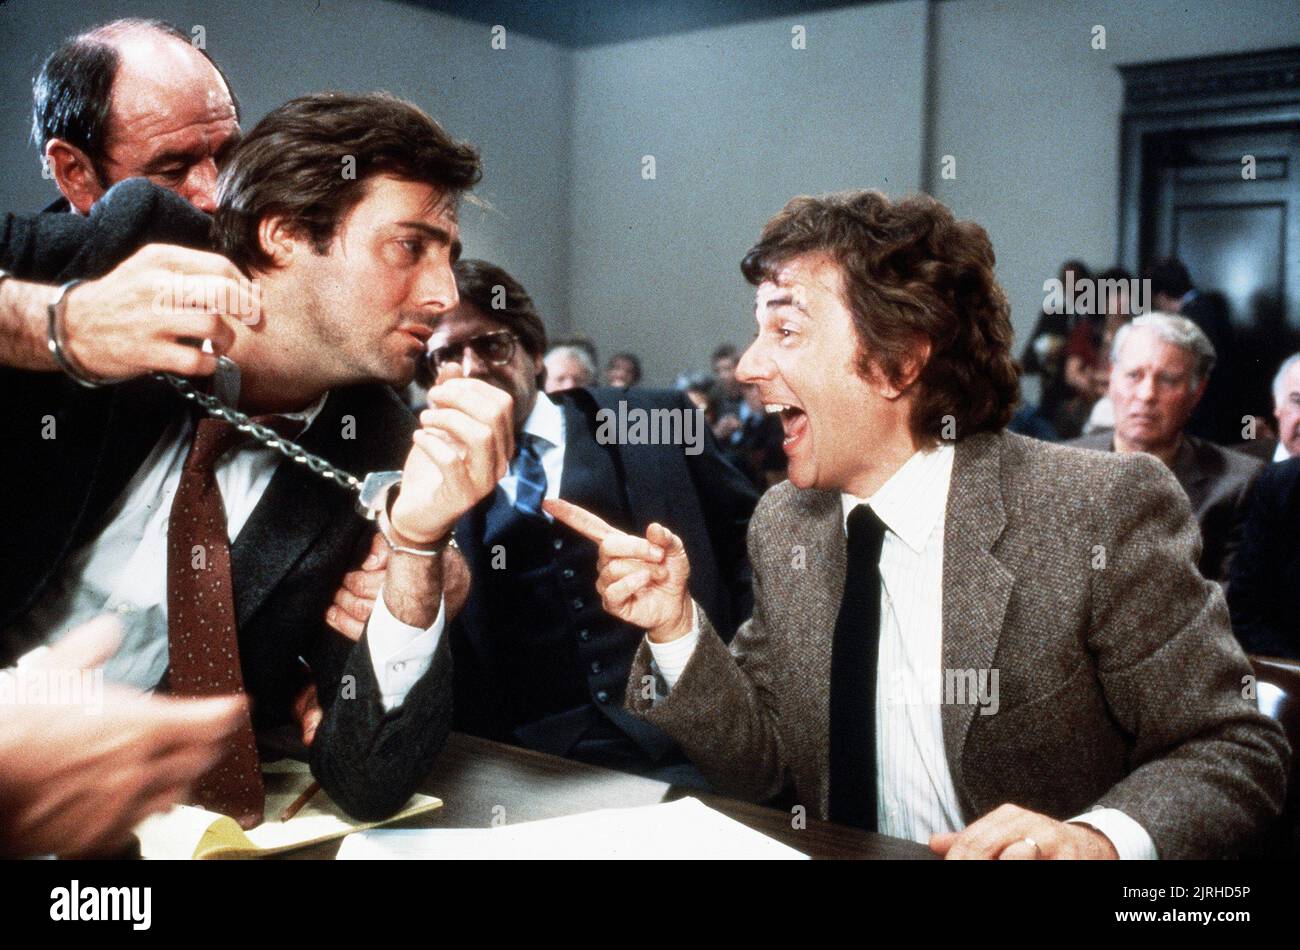 ARMAND ASSANTE, DUDLEY MOORE, UNFAITHFULLY YOURS, 1984 Stock Photo